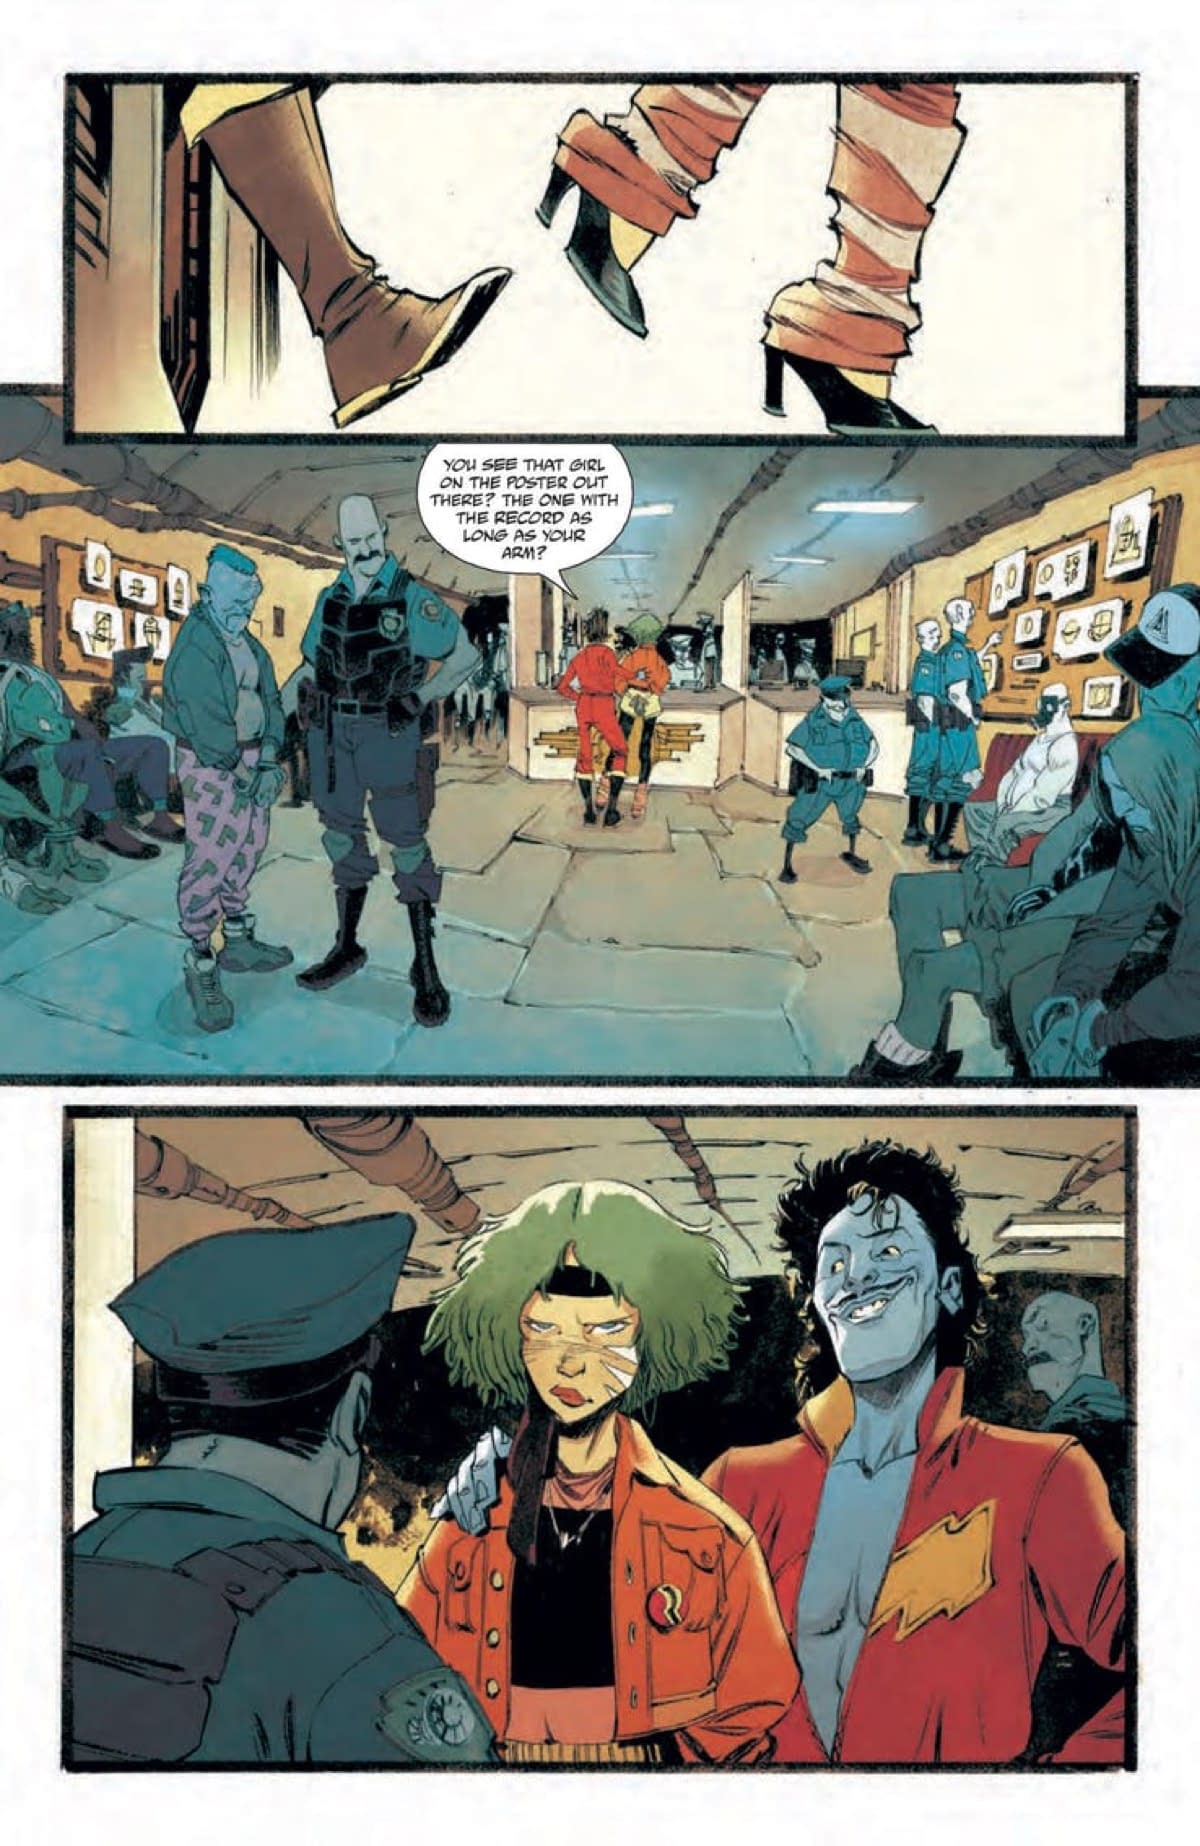 First Look at Mark Millar and Matteo Scalera's Space Bandits